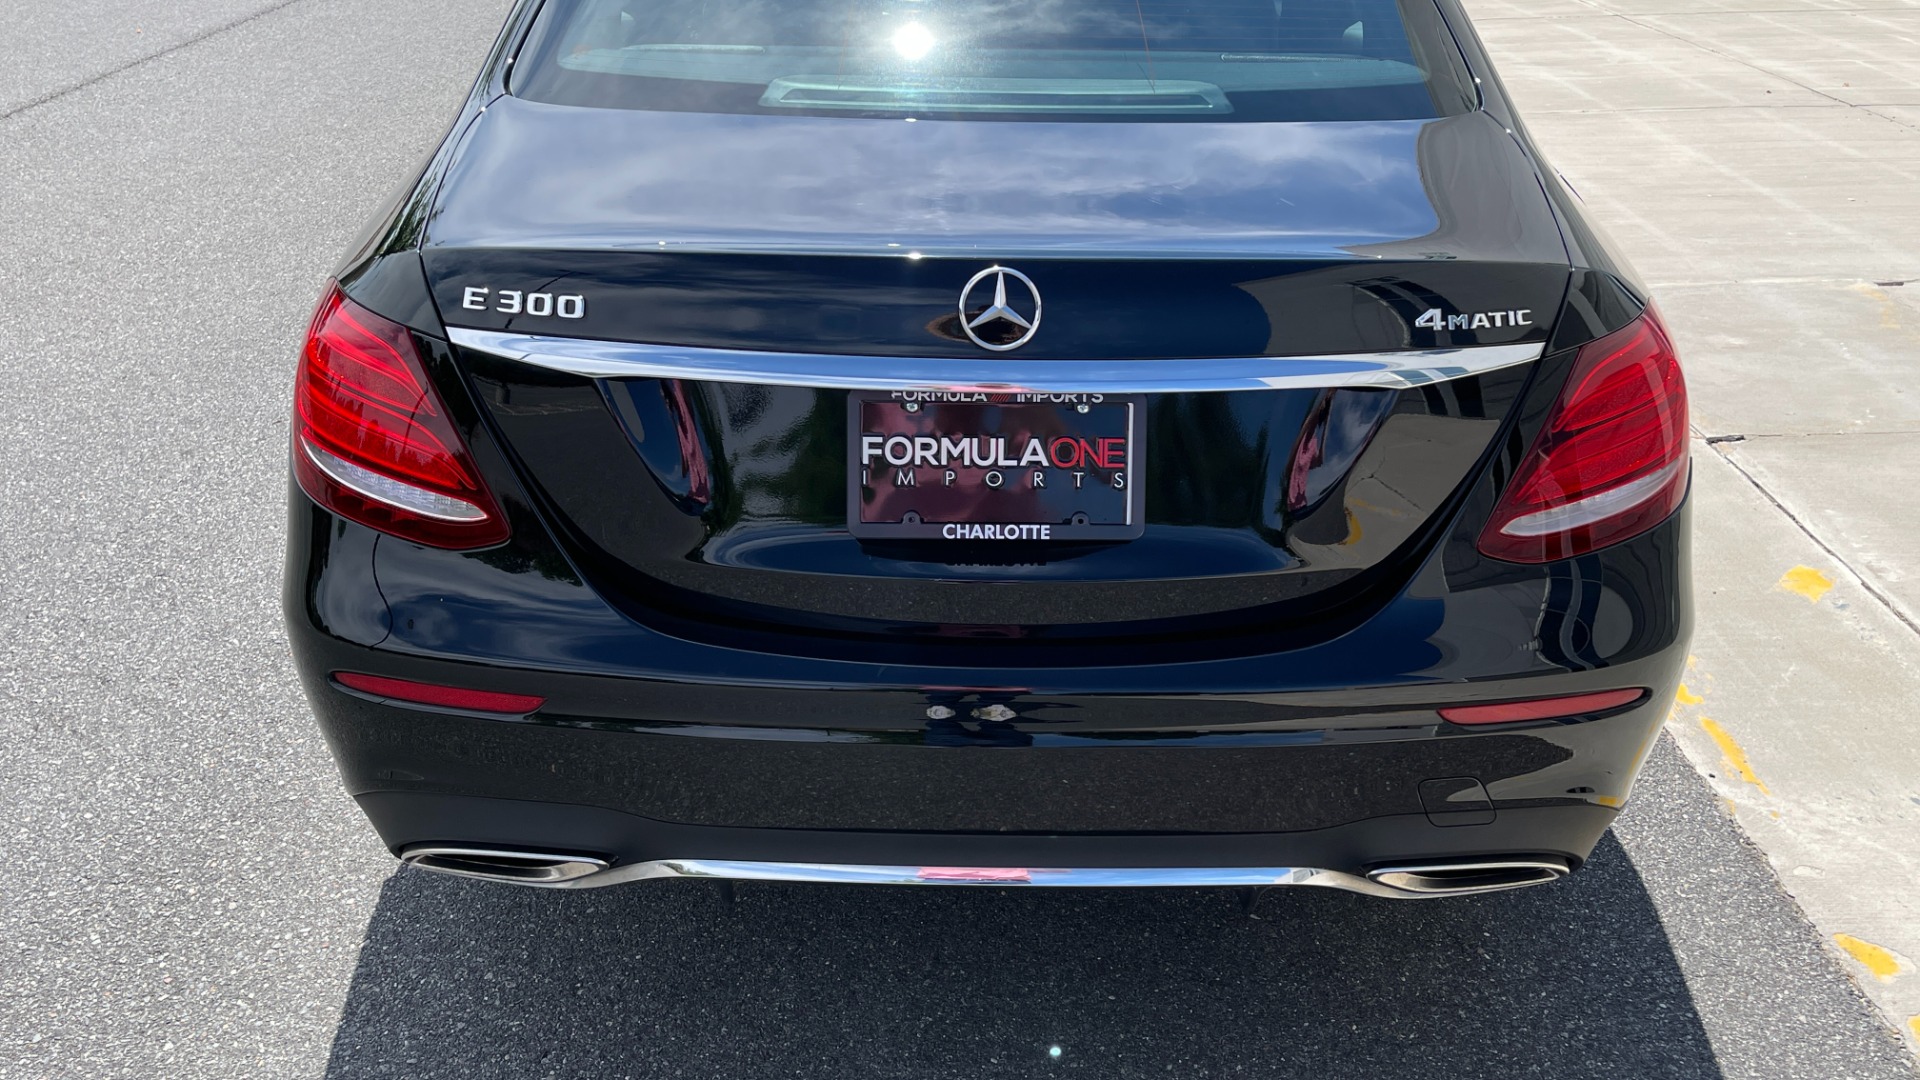 Used 2019 Mercedes-Benz E-Class E300 / 4MATIC / BURMESTER SOUND / PREMIUM PACKAGE / BLIND SPOT ASSIST for sale $39,395 at Formula Imports in Charlotte NC 28227 9